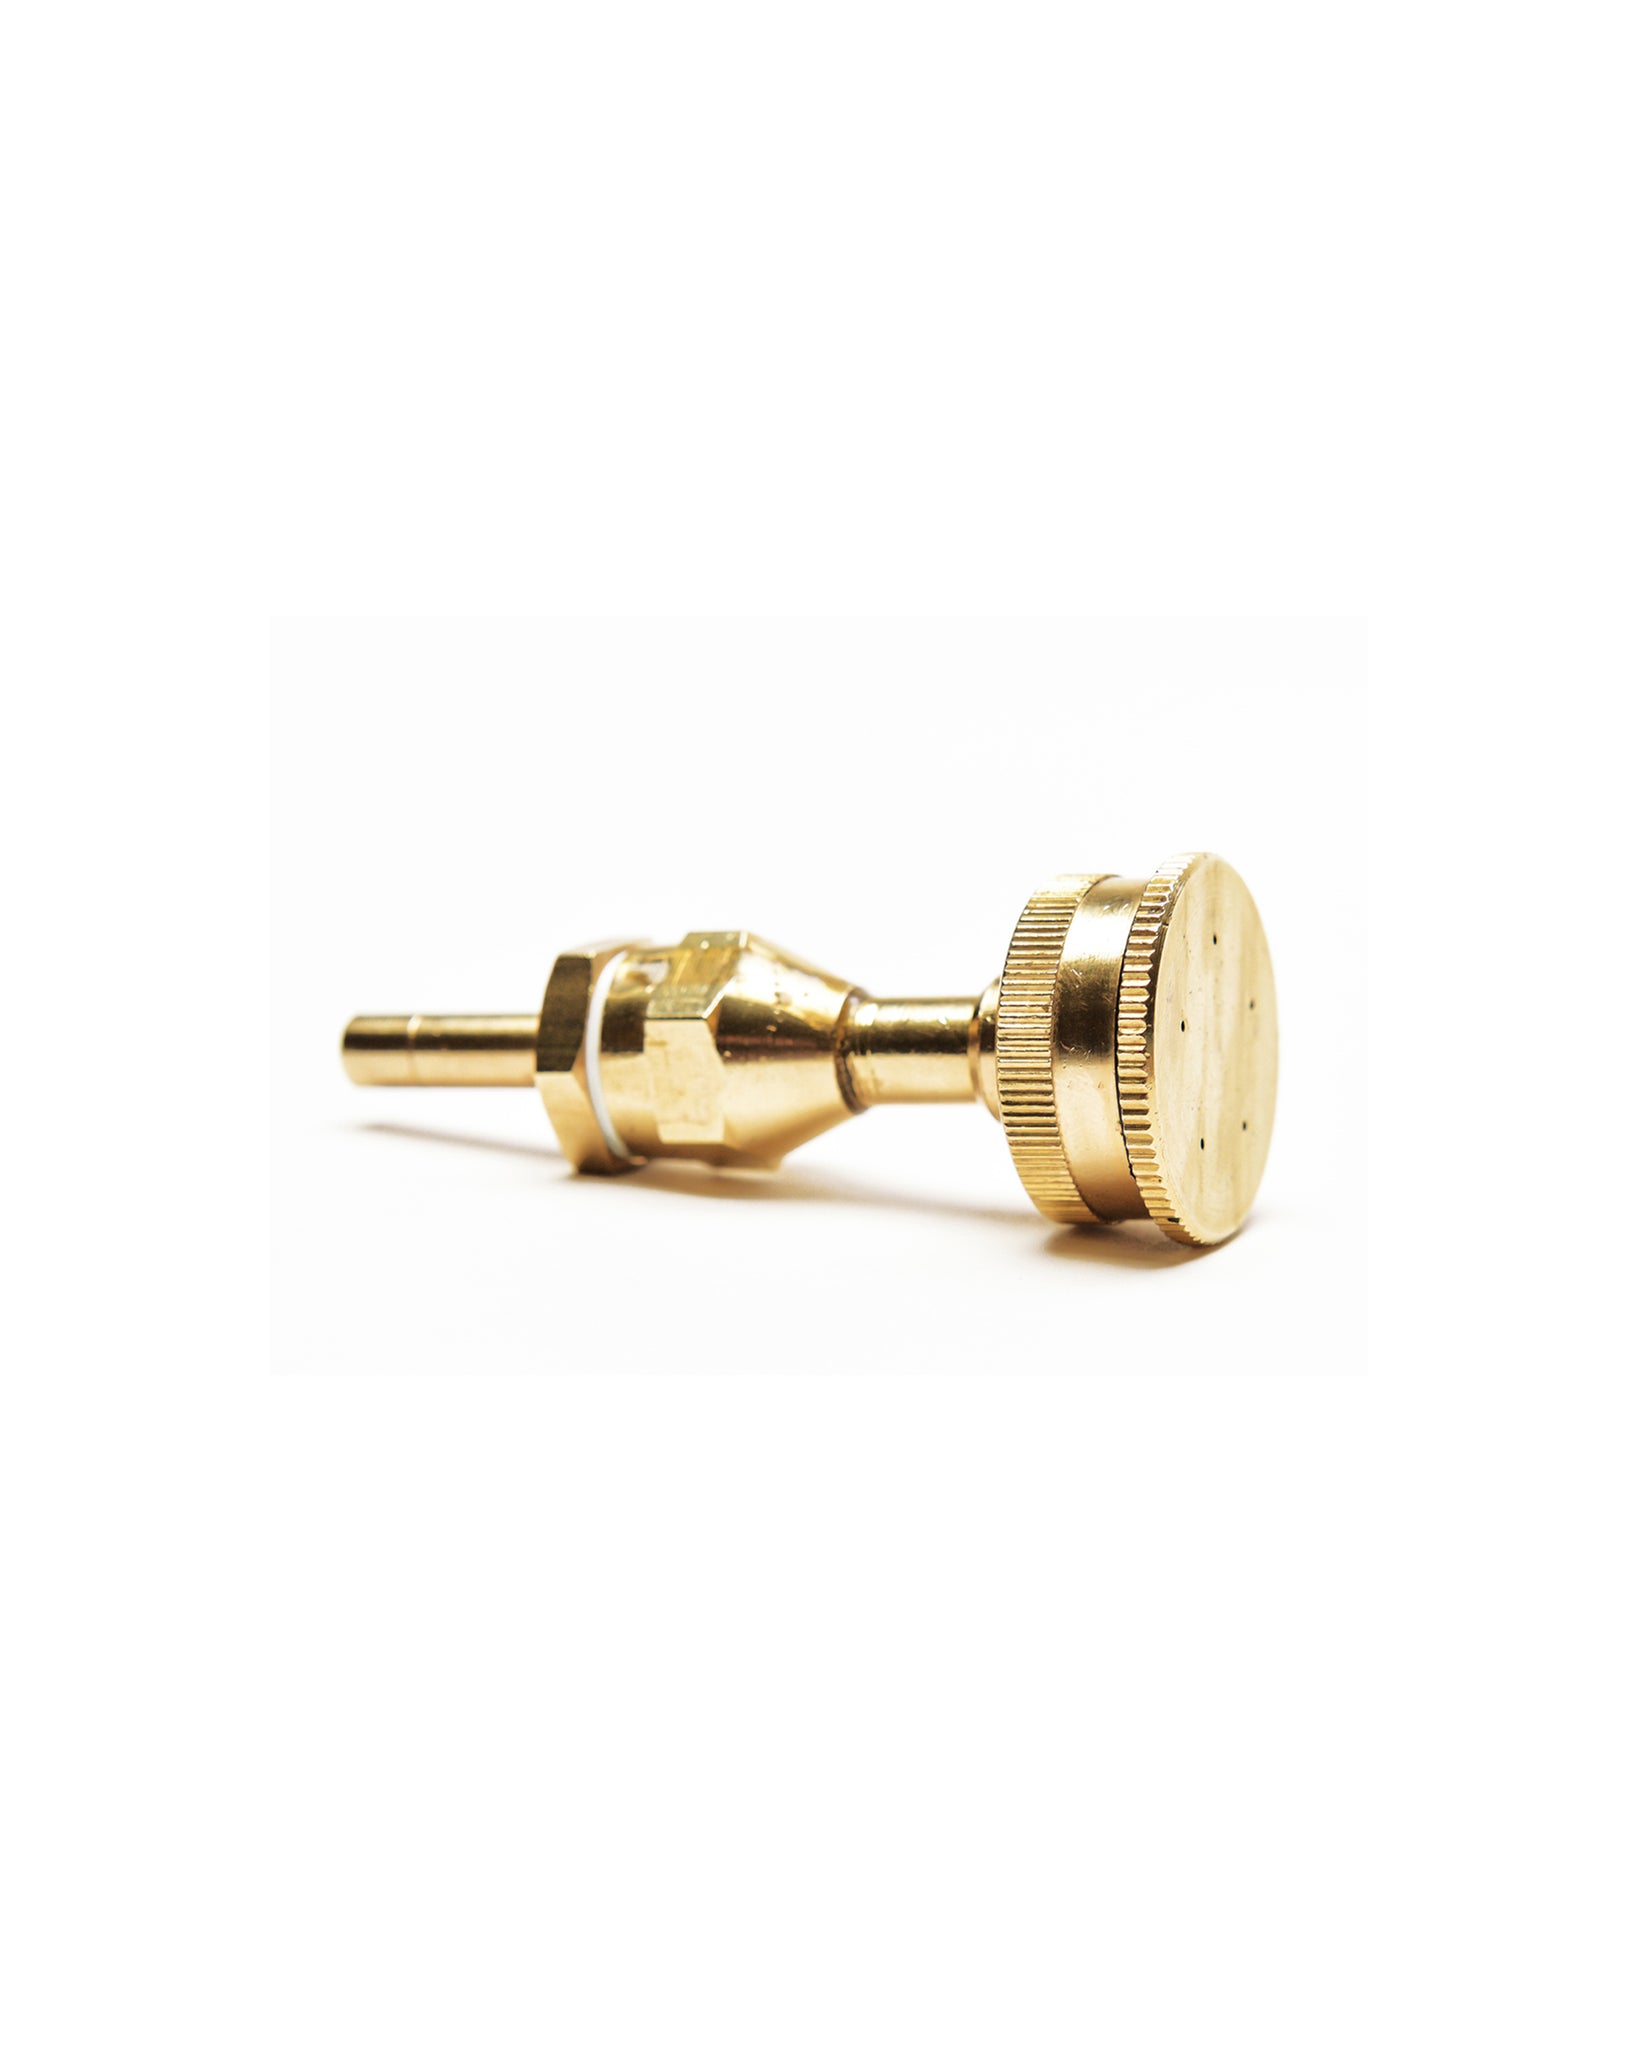 brass showerhead attachment for misting hydration backpack